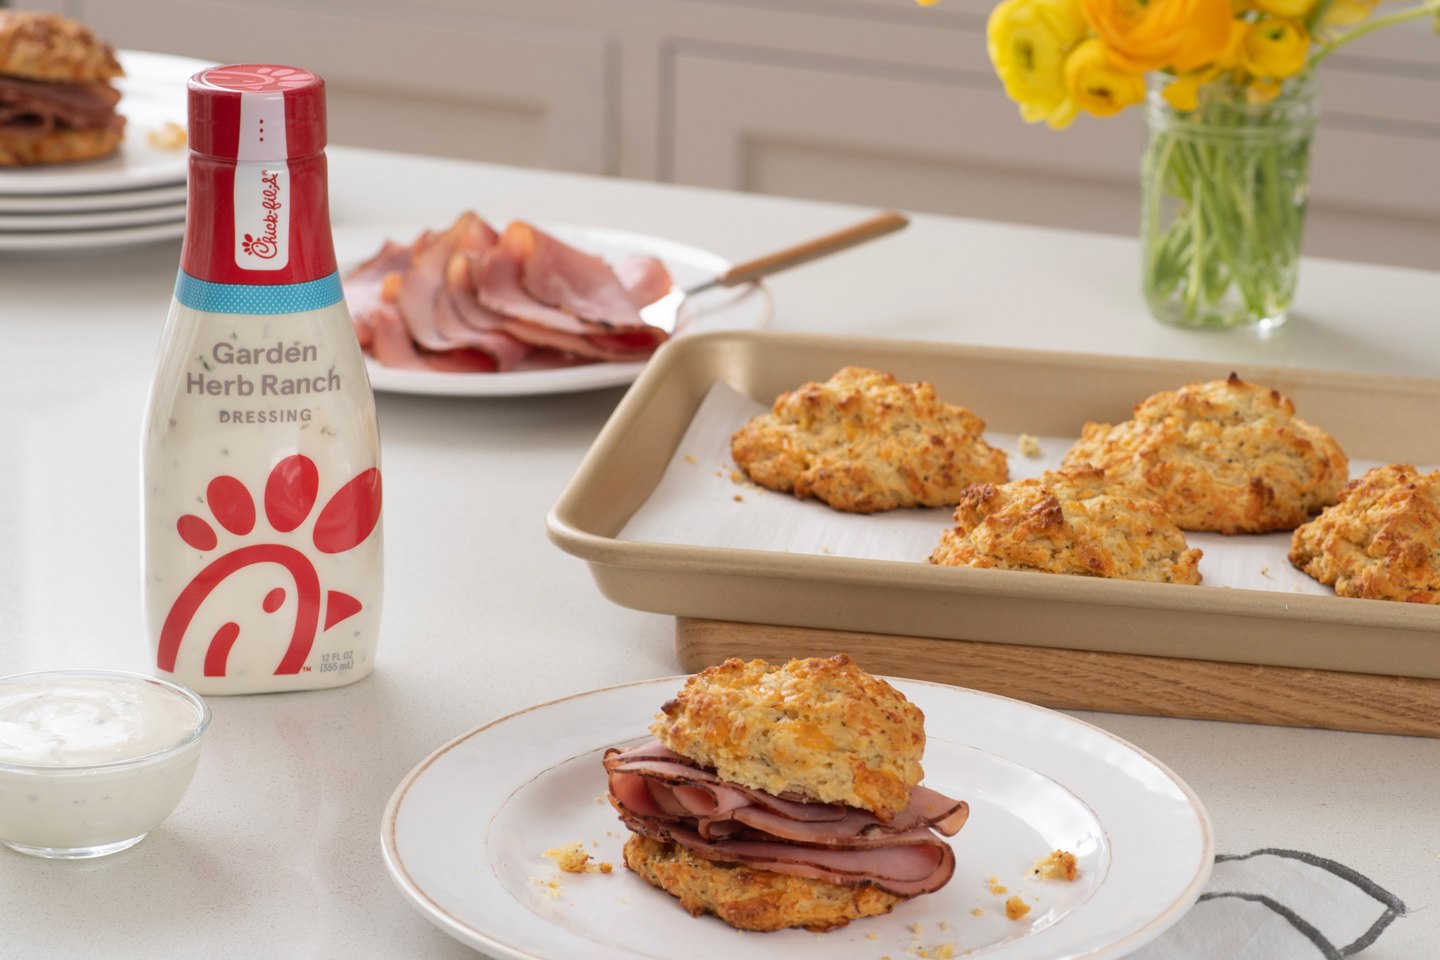 Cheddar Ranch Biscuits with Ham on a plate in front of a bottle of Garden Herb Ranch Dressing